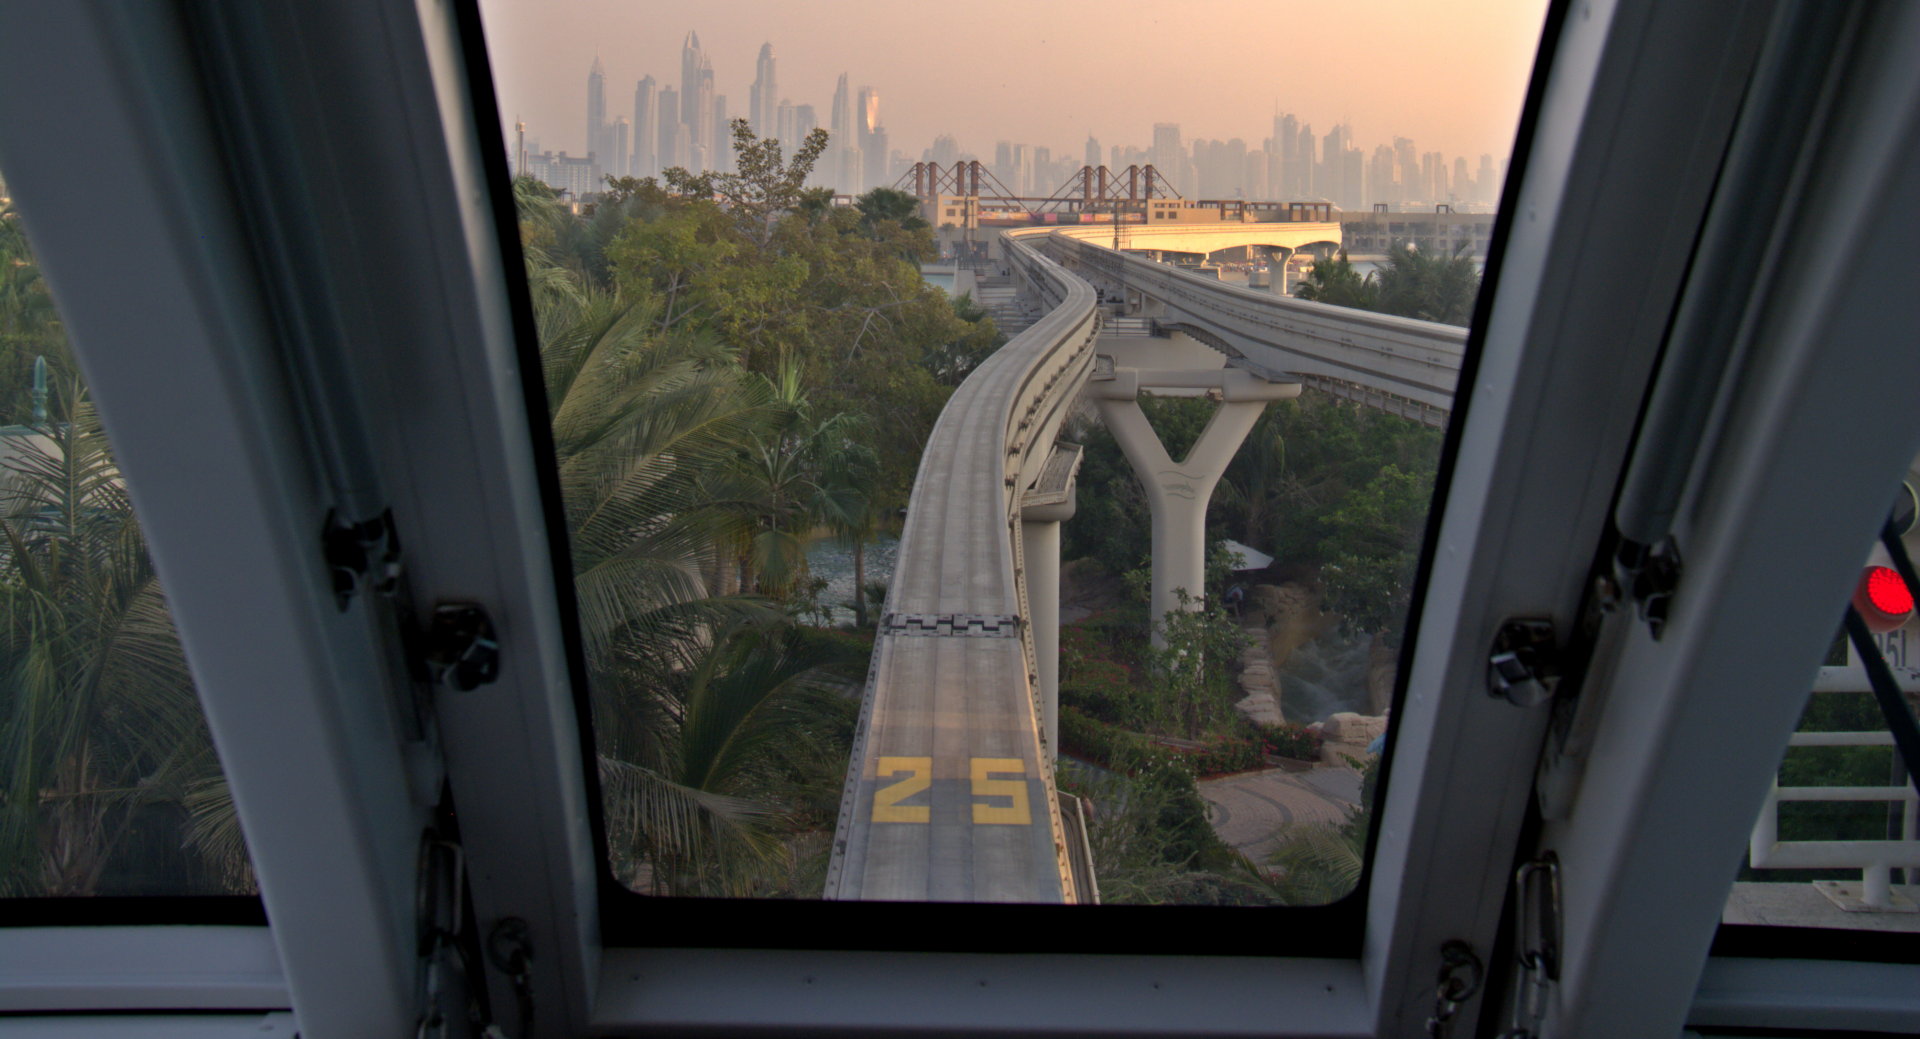 View from the Monorail on The Palm Jumeirah.